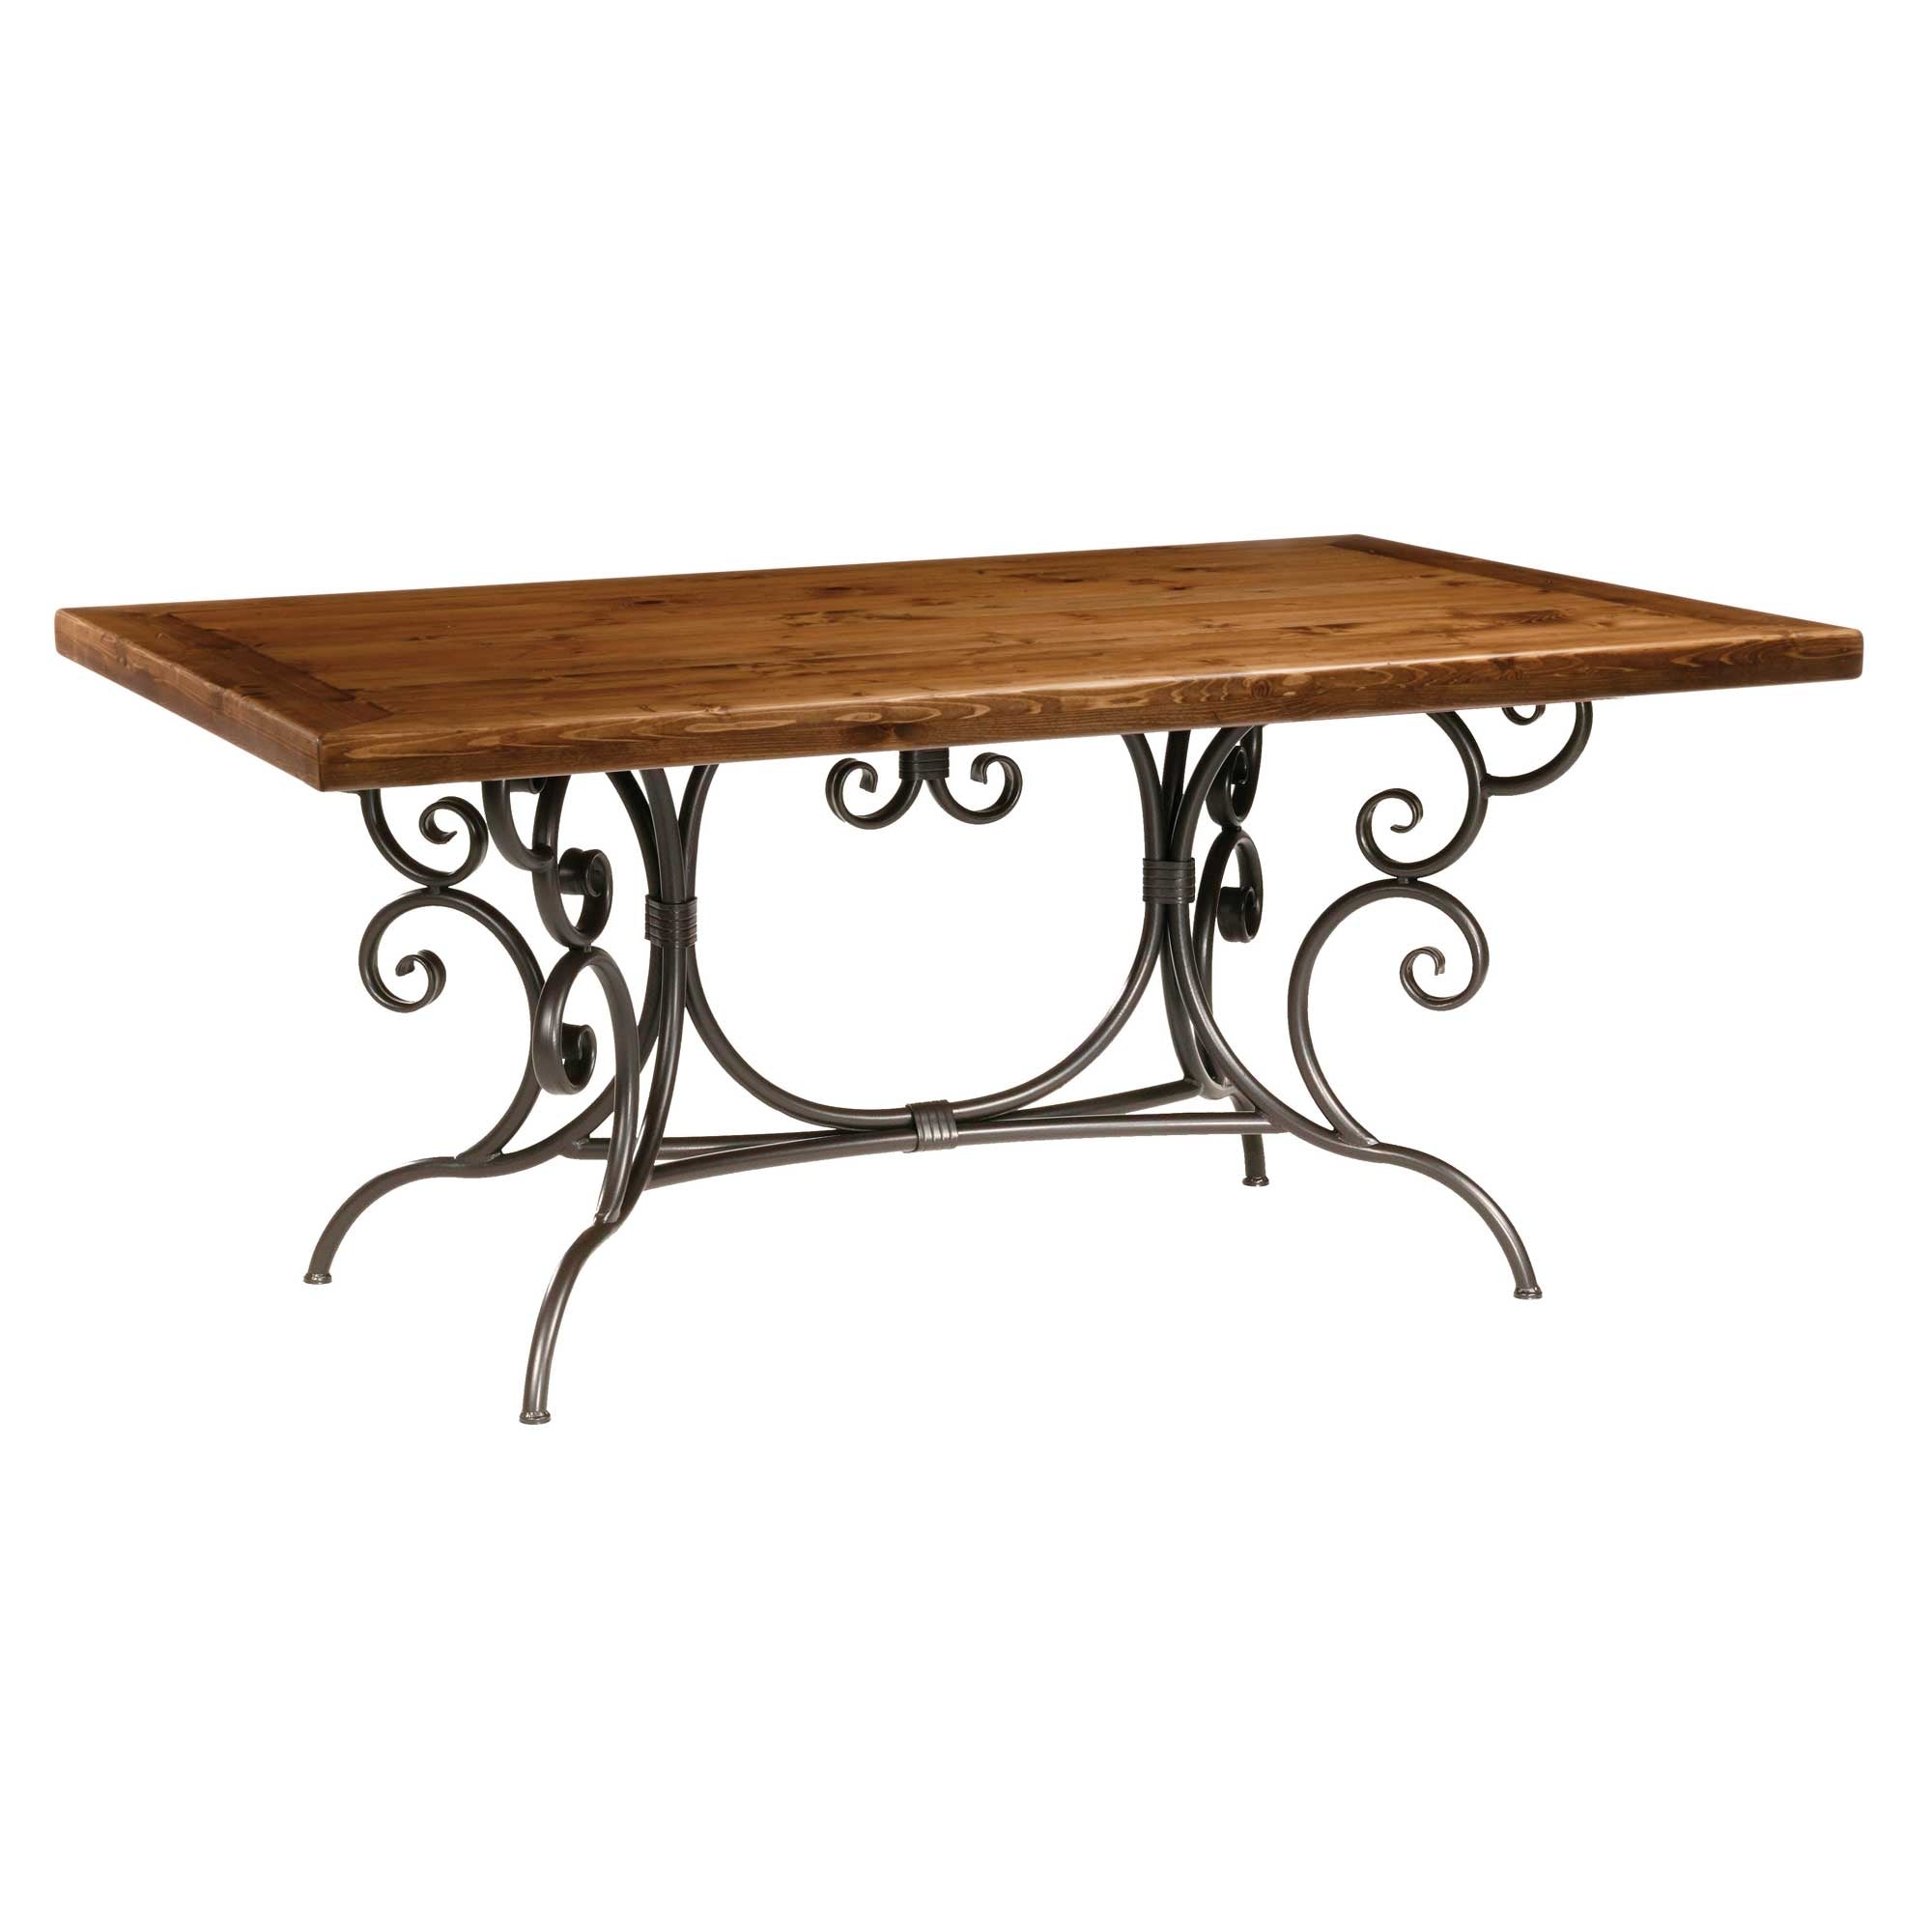 Wrought Iron Dining Table Base, Wrought Iron Dining Table Base